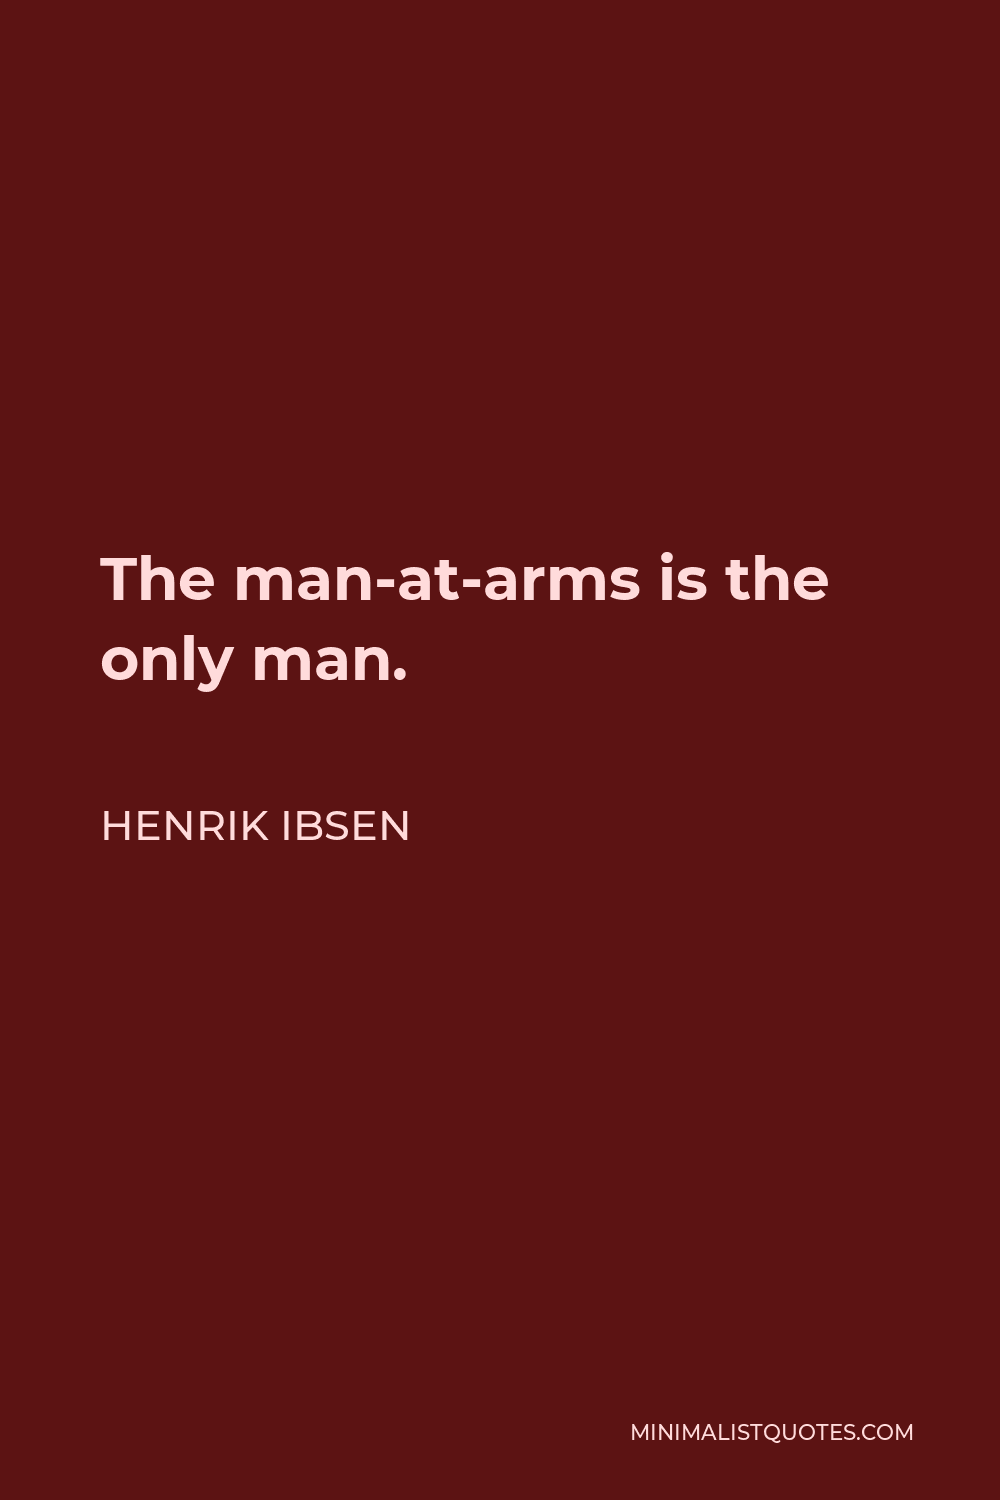 Henrik Ibsen Quote - The man-at-arms is the only man.